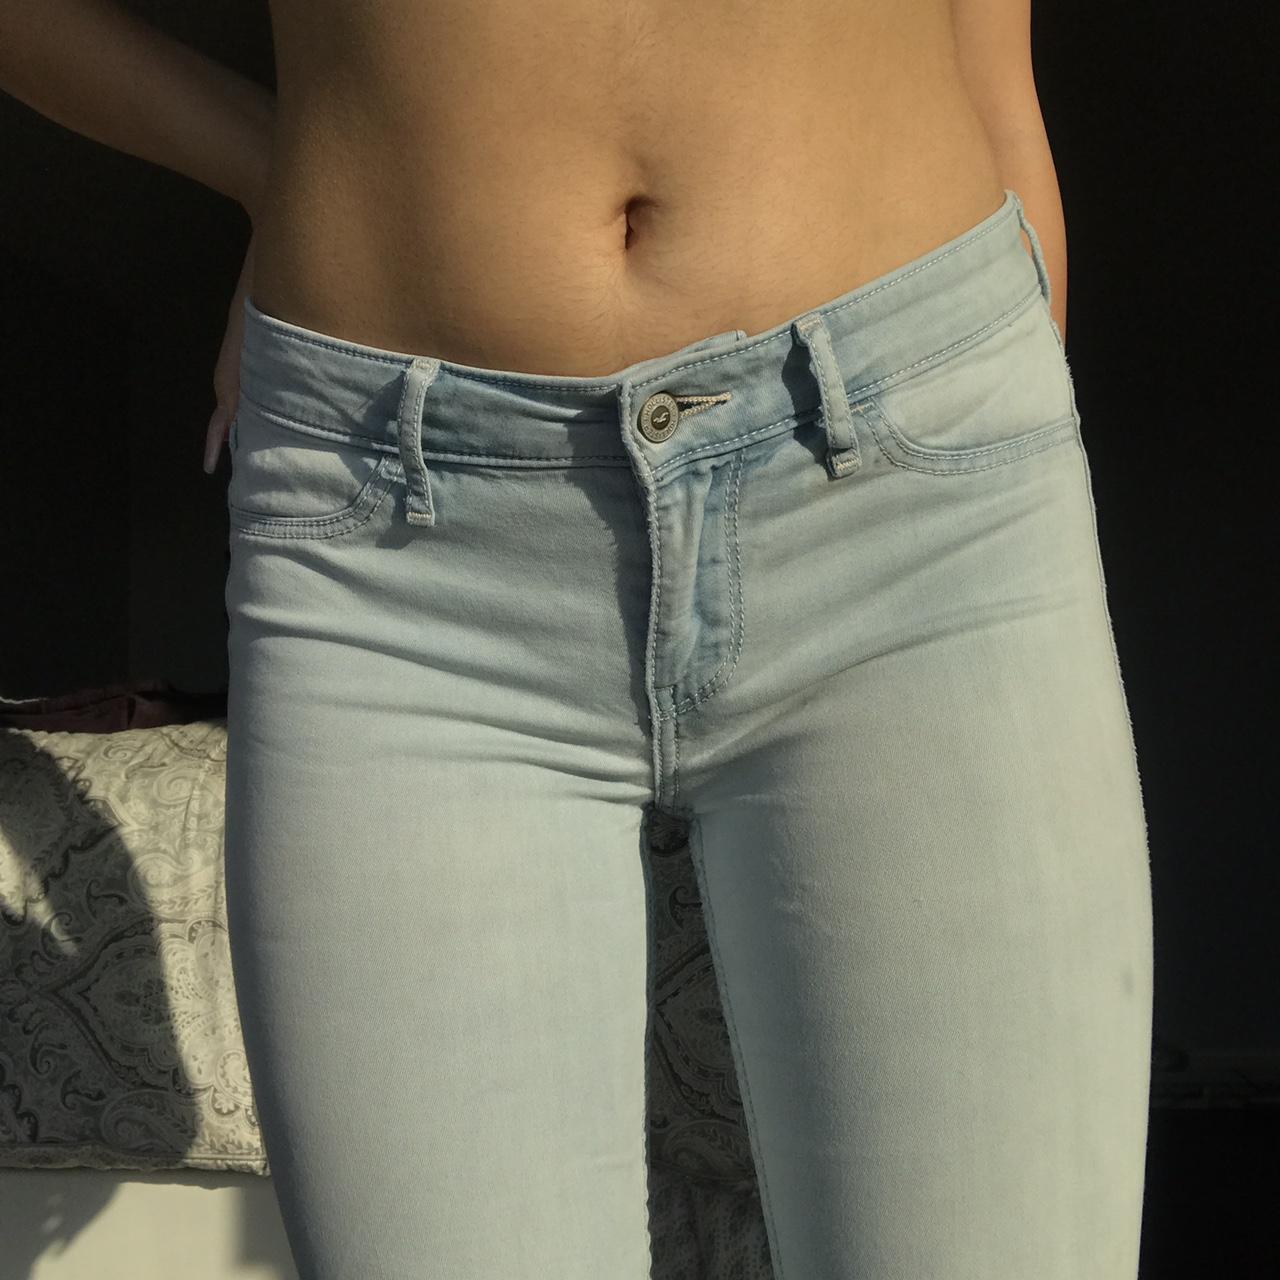 Hollister low rise jean legging :) these pants